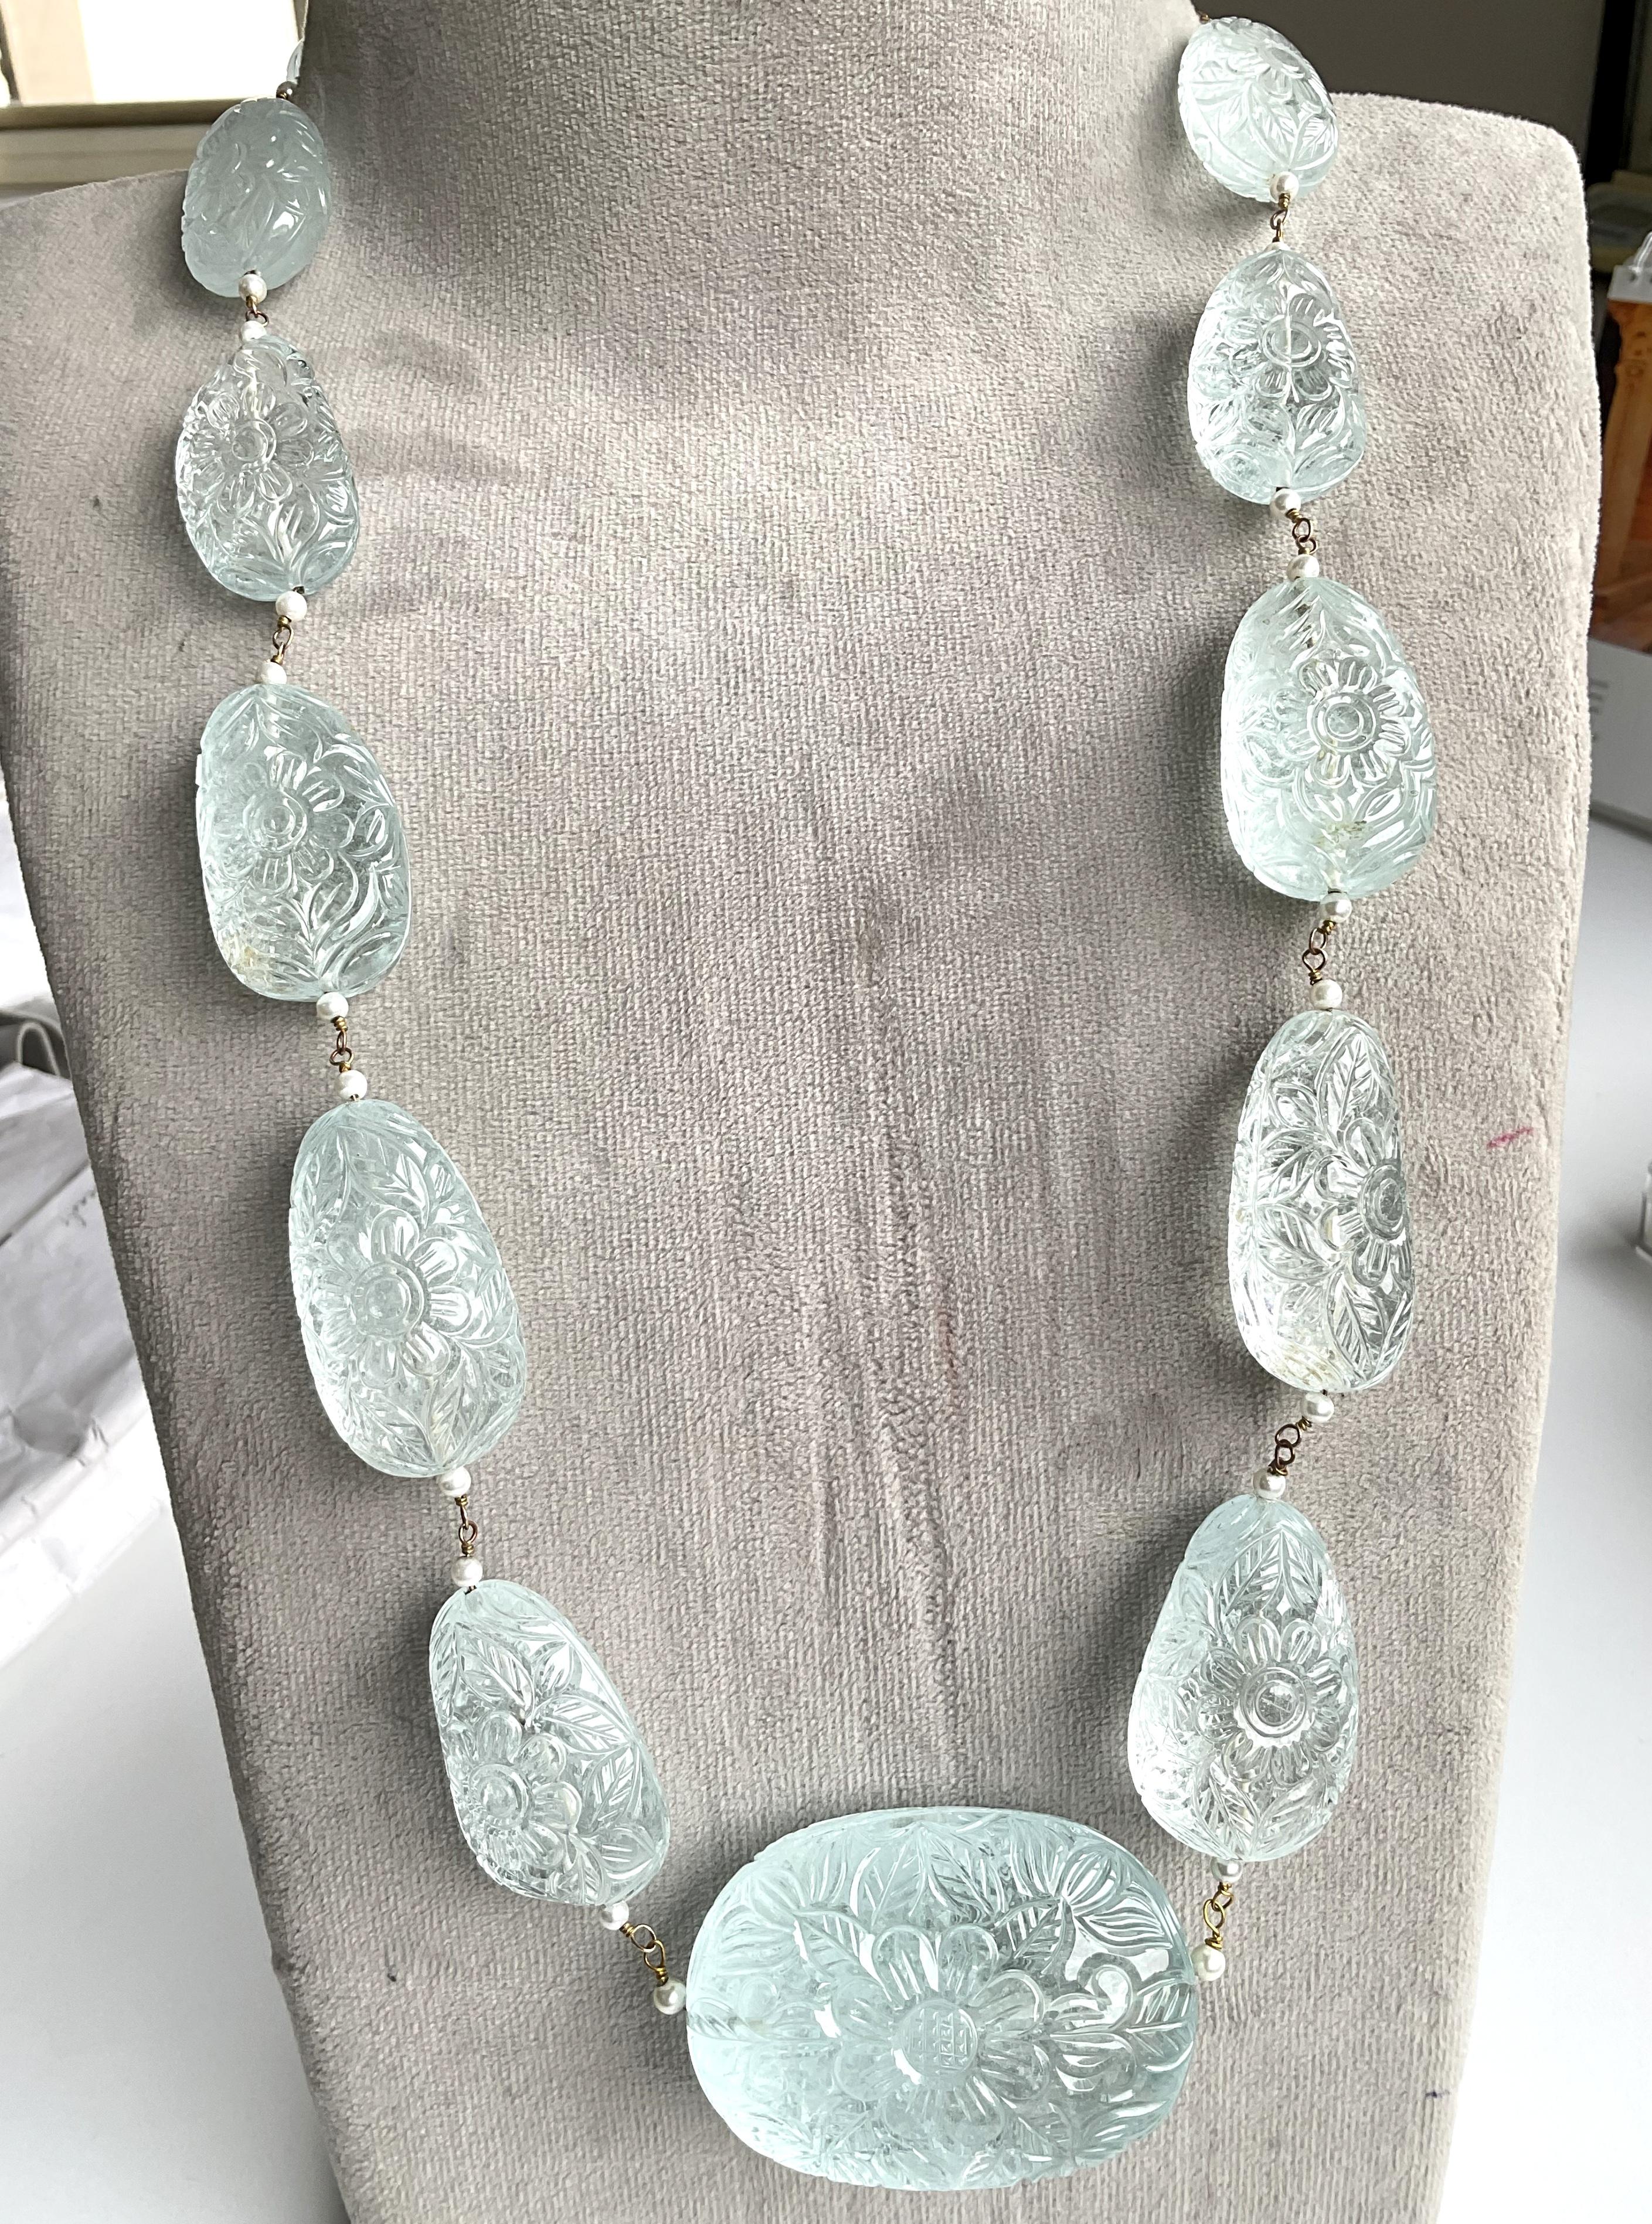 1828.70 Carats Aquamarine Carved Tumbled Necklace Top Quality Natural Gemstone In New Condition For Sale In Jaipur, RJ